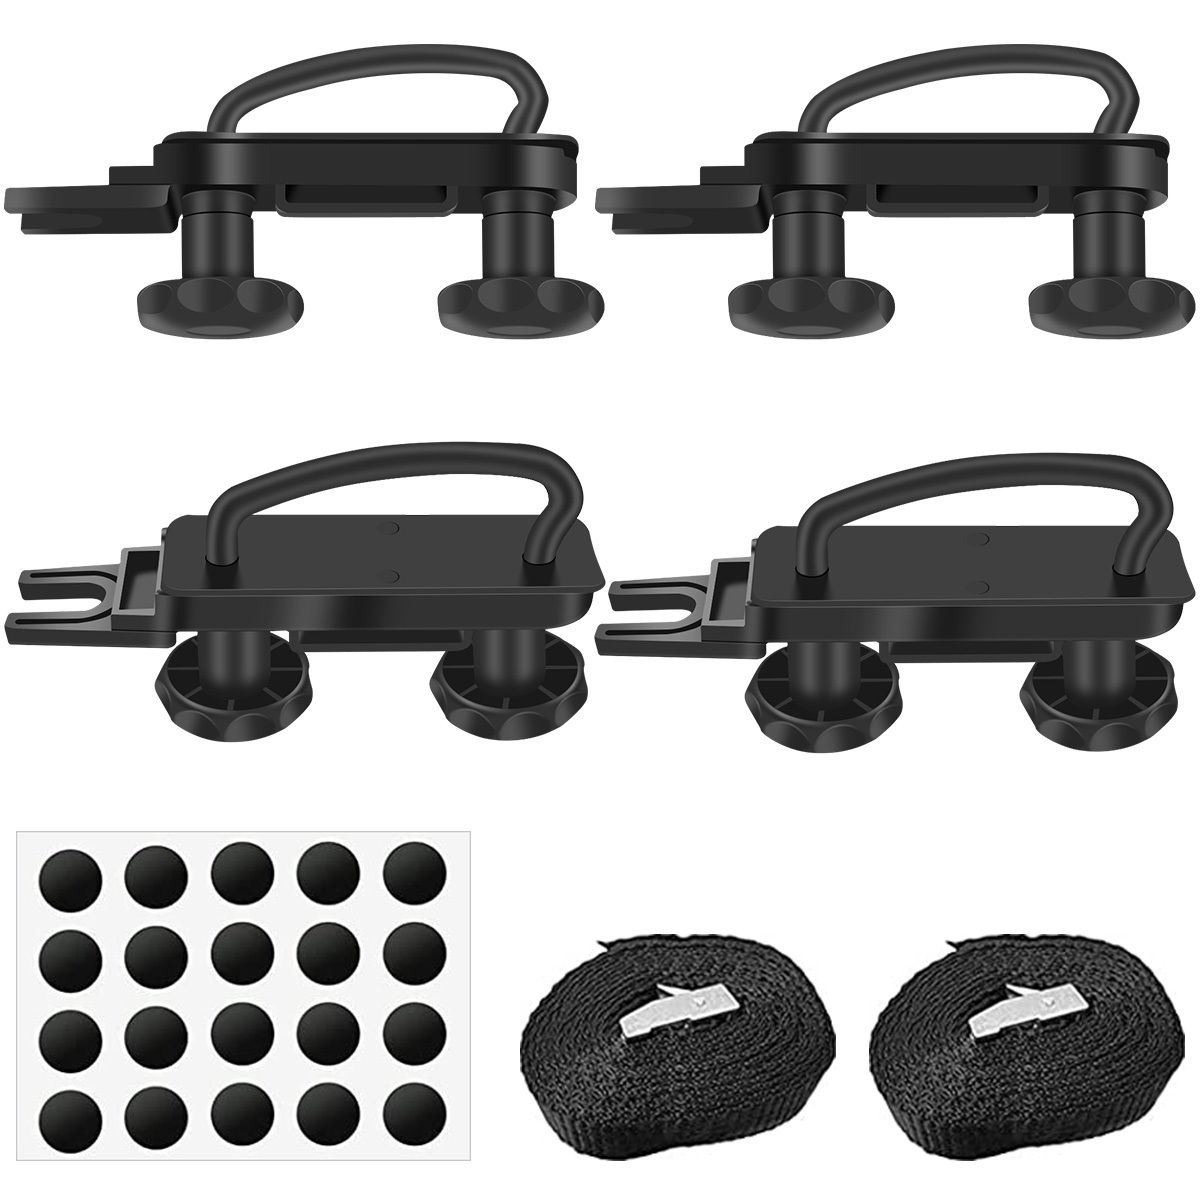  Car Roof Box U-Bolt Clamps,MoreChioce Stainless Steel U-Bolts  Clamps Mounting Fitting Kit Universal U-Bolts Clamps Car Roof Luggage  Accessories : Automotive